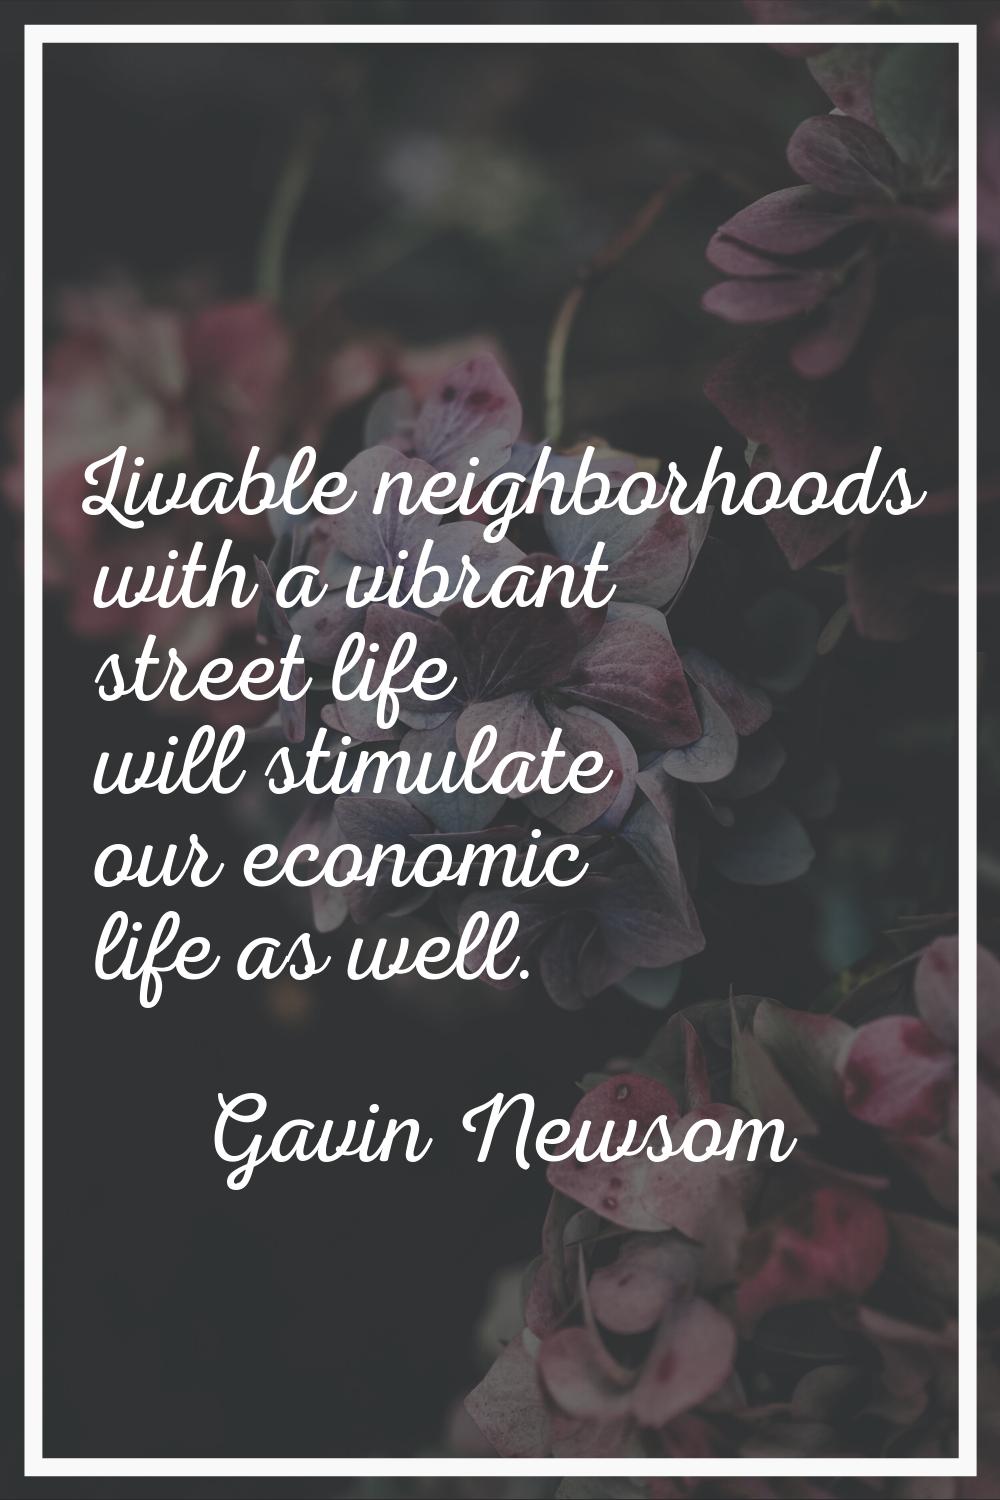 Livable neighborhoods with a vibrant street life will stimulate our economic life as well.